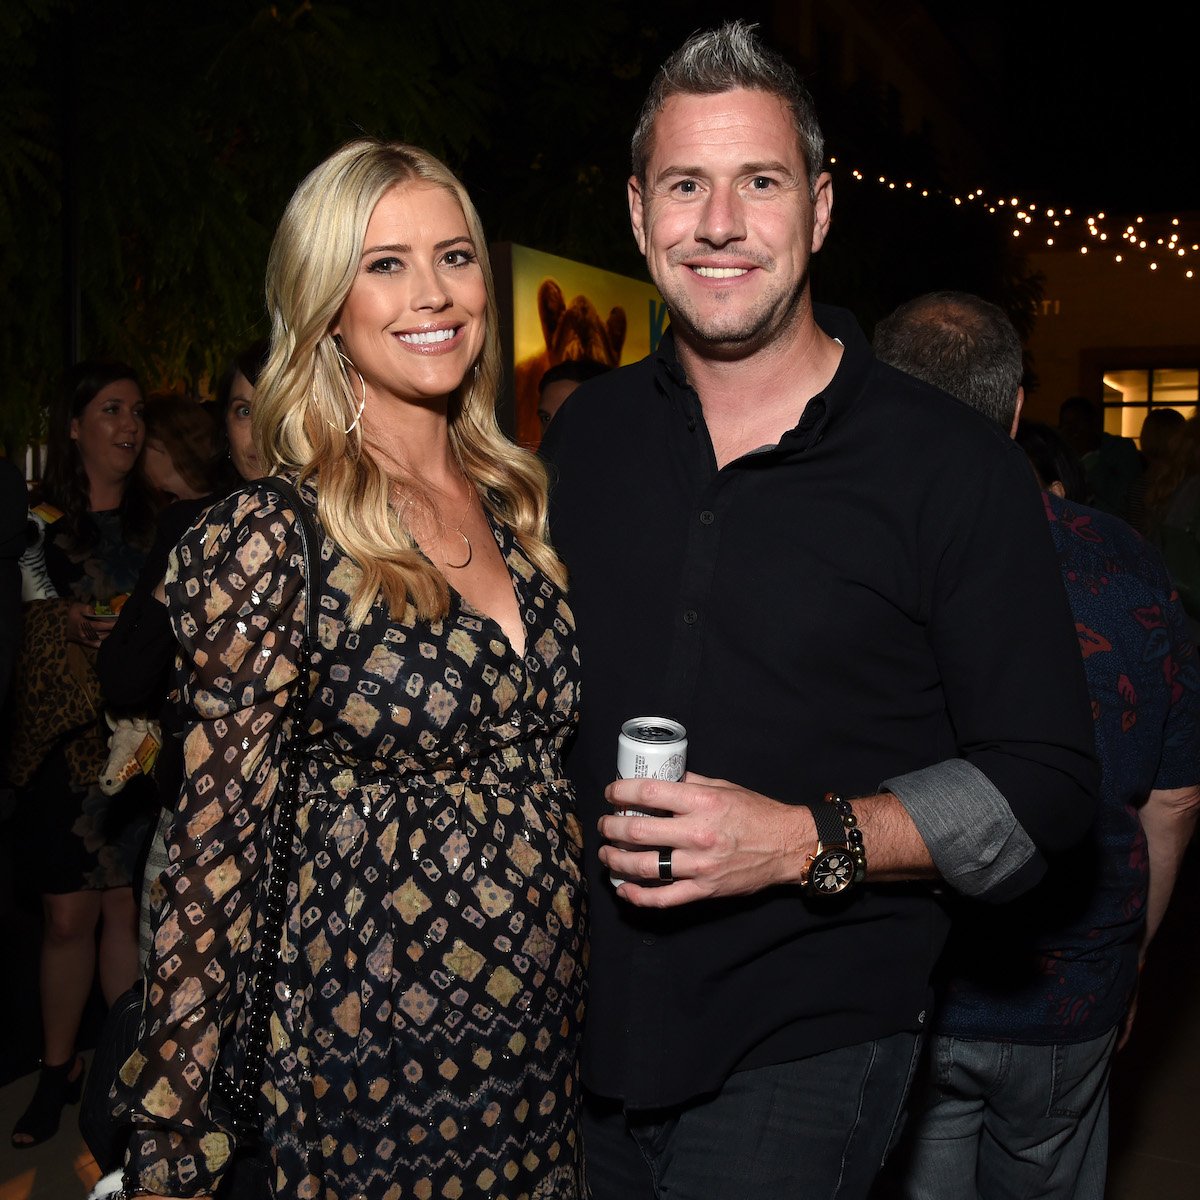 Christina Hall and Ant Anstead, who recently reached a custody agreement over their son Hudson, smile and pose together at an event.